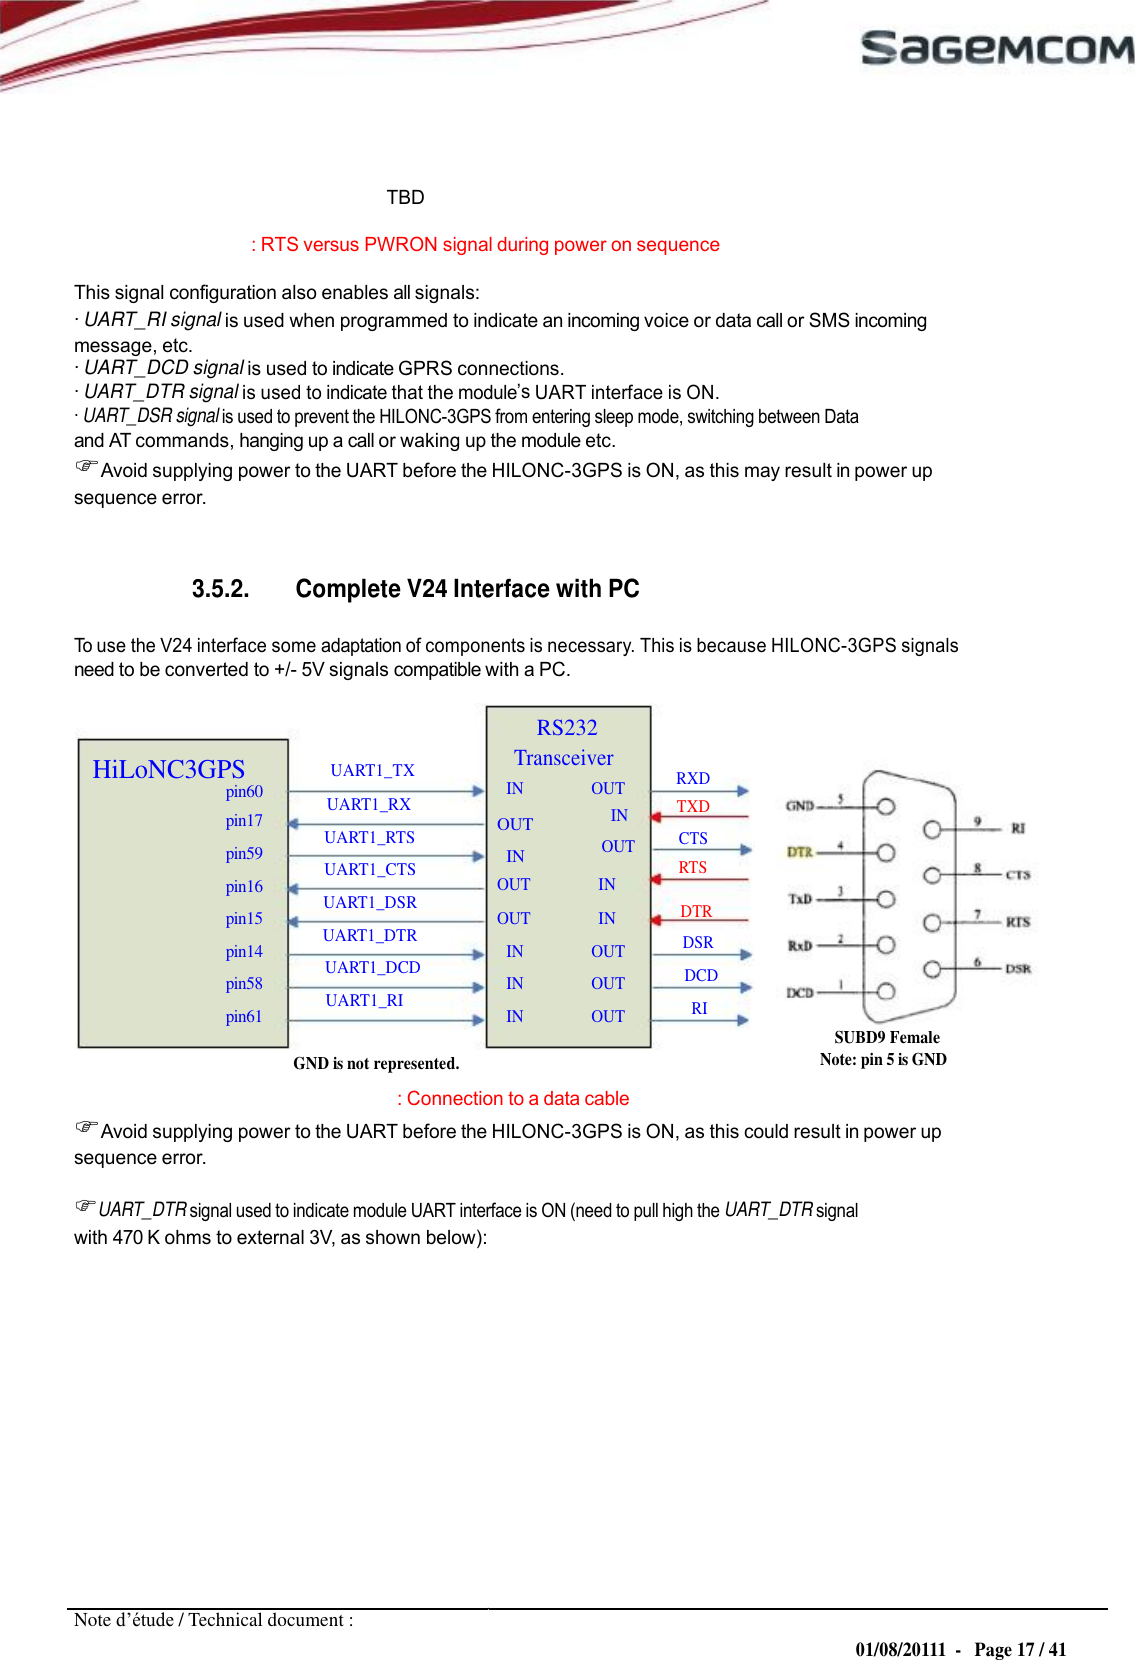 OUT IN  URD1– OTL 5696.1– 022 /  72740  Edition 0.4 HILONC- 3GPS APPLICATION NOTE         TBD : RTS versus PWRON signal during power on sequence This signal configuration also enables all signals: · UART_RI signal is used when programmed to indicate an incoming voice or data call or SMS incoming message, etc. · UART_DCD signal is used to indicate GPRS connections. · UART_DTR signal is used to indicate that the module UART interface is ON. · UART_DSR signal is used to prevent the HILONC-3GPS from entering sleep mode, switching between Data and AT commands, hanging up a call or waking up the module etc. Avoid supplying power to the UART before the HILONC-3GPS is ON, as this may result in power up sequence error.   3.5.2. Complete V24 Interface with PC  To use the V24 interface some adaptation of components is necessary. This is because HILONC-3GPS signals need to be converted to +/- 5V signals compatible with a PC.  RS232 HiLoNC3GPS pin60 pin17 pin59 pin16 pin15 pin14 pin58 pin61 UART1_TX UART1_RX UART1_RTS UART1_CTS UART1_DSR UART1_DTR UART1_DCD UART1_RI Transceiver IN                  OUT IN OUT OUT                  IN OUT                  IN IN                  OUT IN                  OUT IN                  OUT  RXD TXD CTS RTS  DTR DSR DCD RI SUBD9 Female GND is not represented. Note: pin 5 is GND : Connection to a data cable Avoid supplying power to the UART before the HILONC-3GPS is ON, as this could result in power up sequence error.  UART_DTR signal used to indicate module UART interface is ON (need to pull high the UART_DTR signal with 470 K ohms to external 3V, as shown below):               Note d’étude / Technical document : 01/08/20111  -   Page 17 / 41 